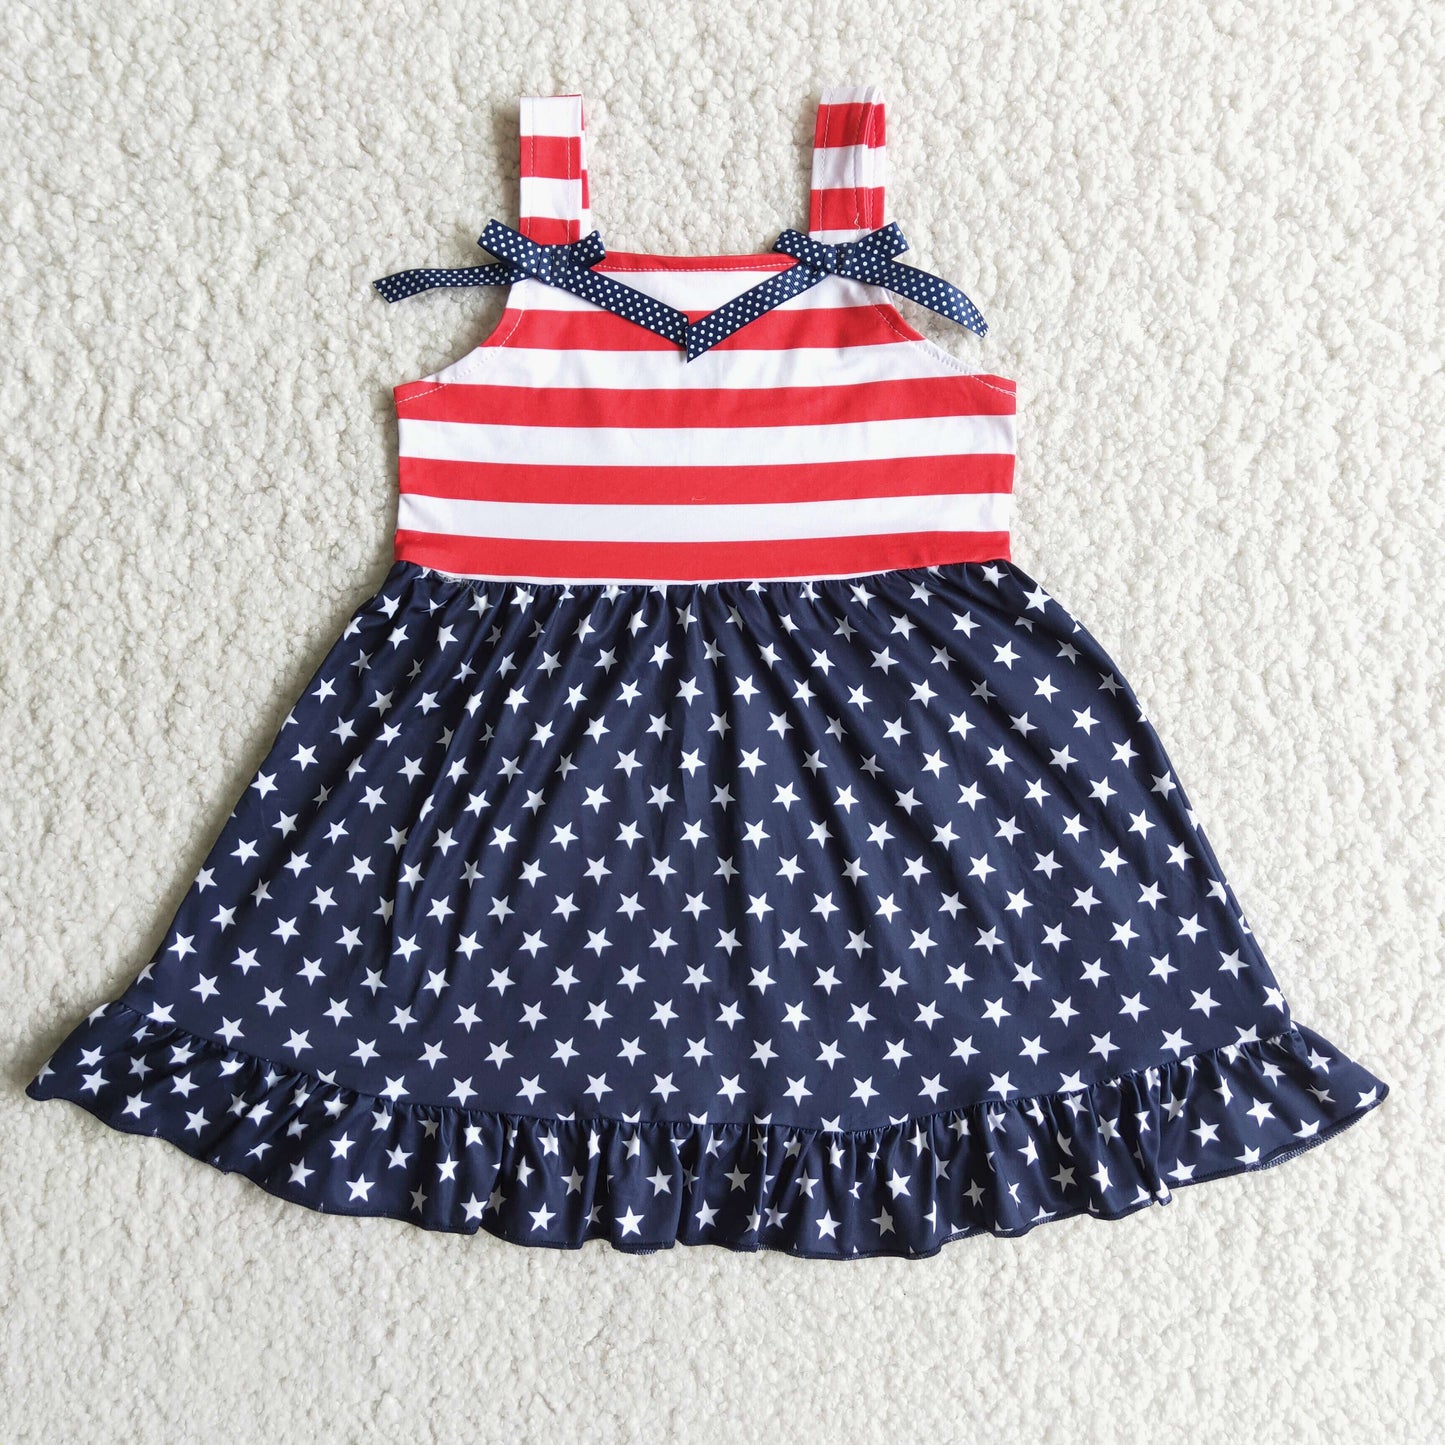 (Promotion)A14-10 Sleeveless 4th of July dress